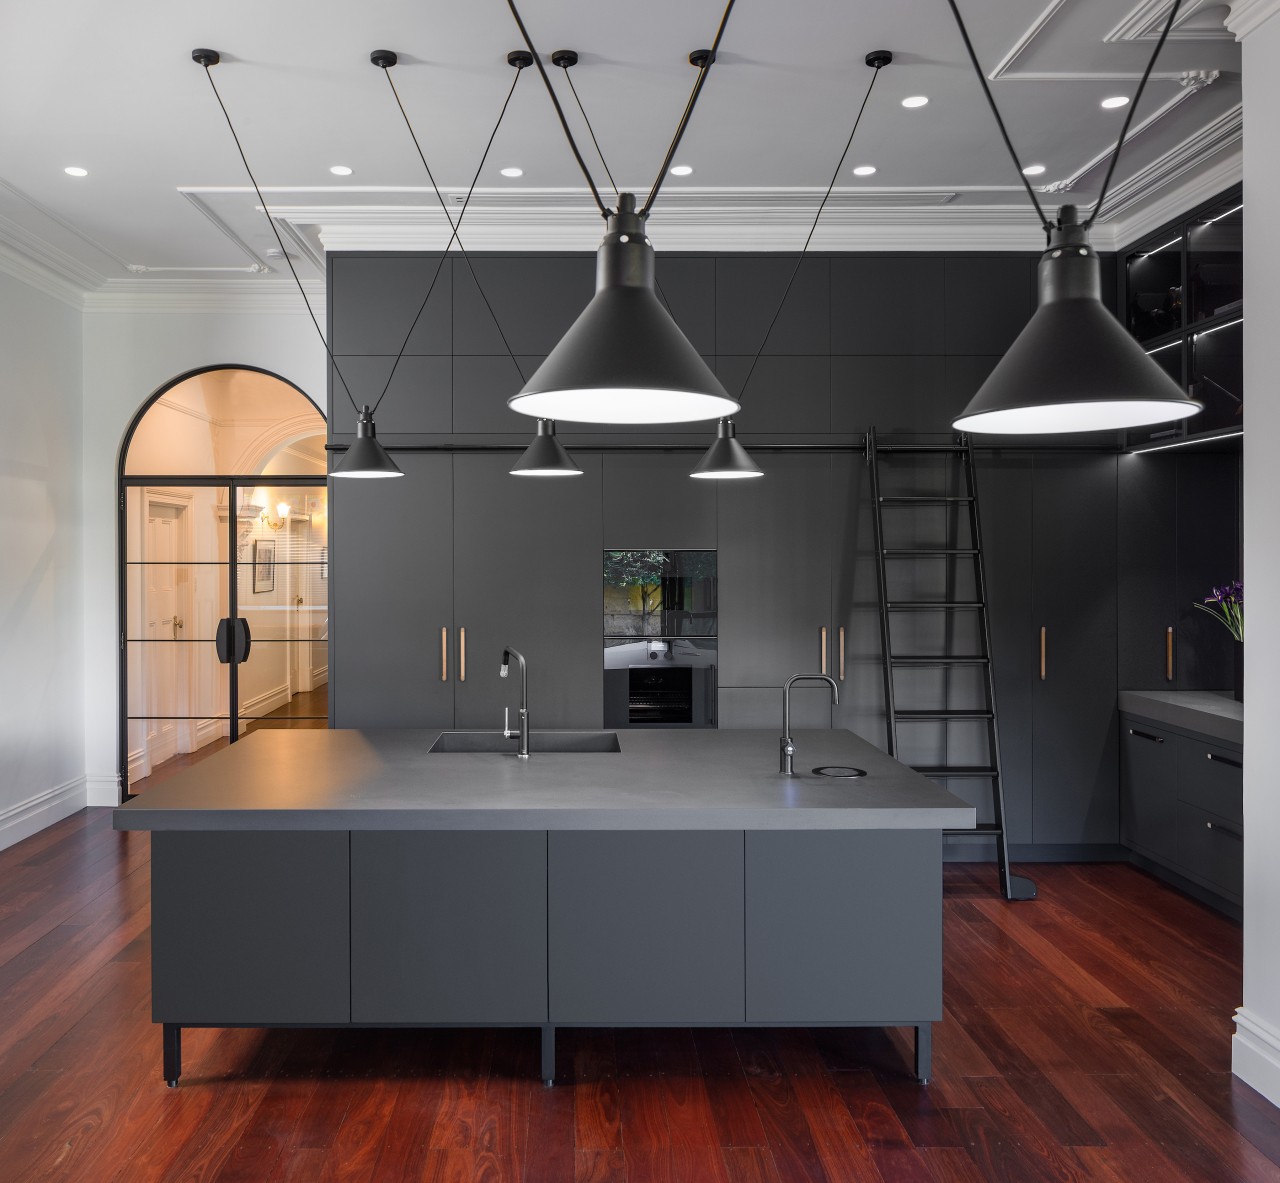 This contemporary, industrial kitchen renovation transformed the space 